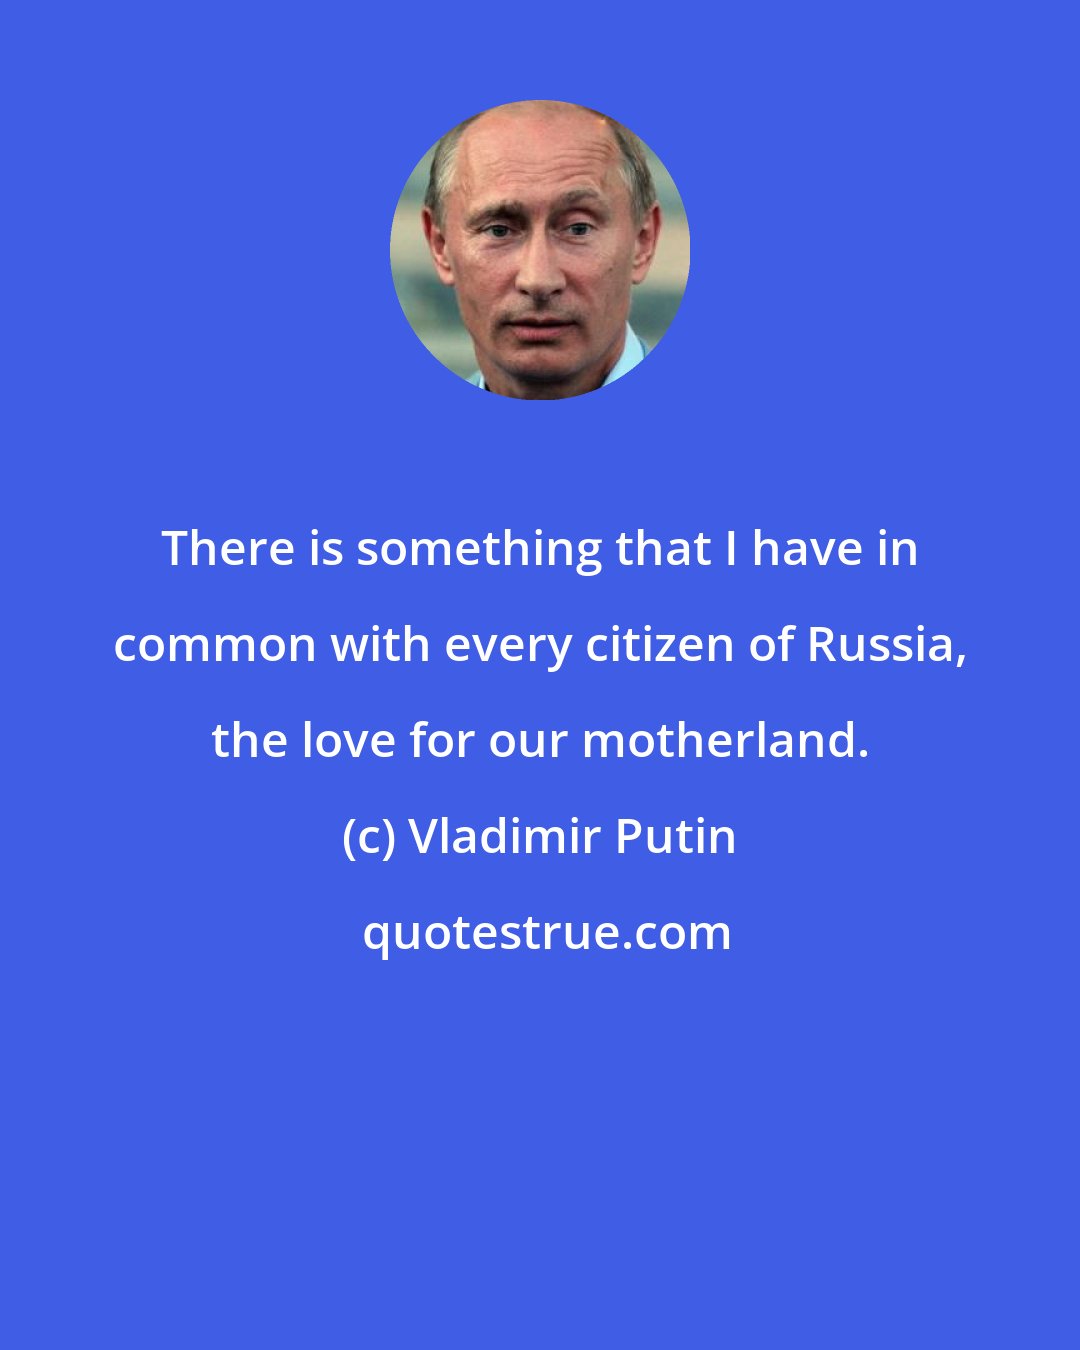 Vladimir Putin: There is something that I have in common with every citizen of Russia, the love for our motherland.